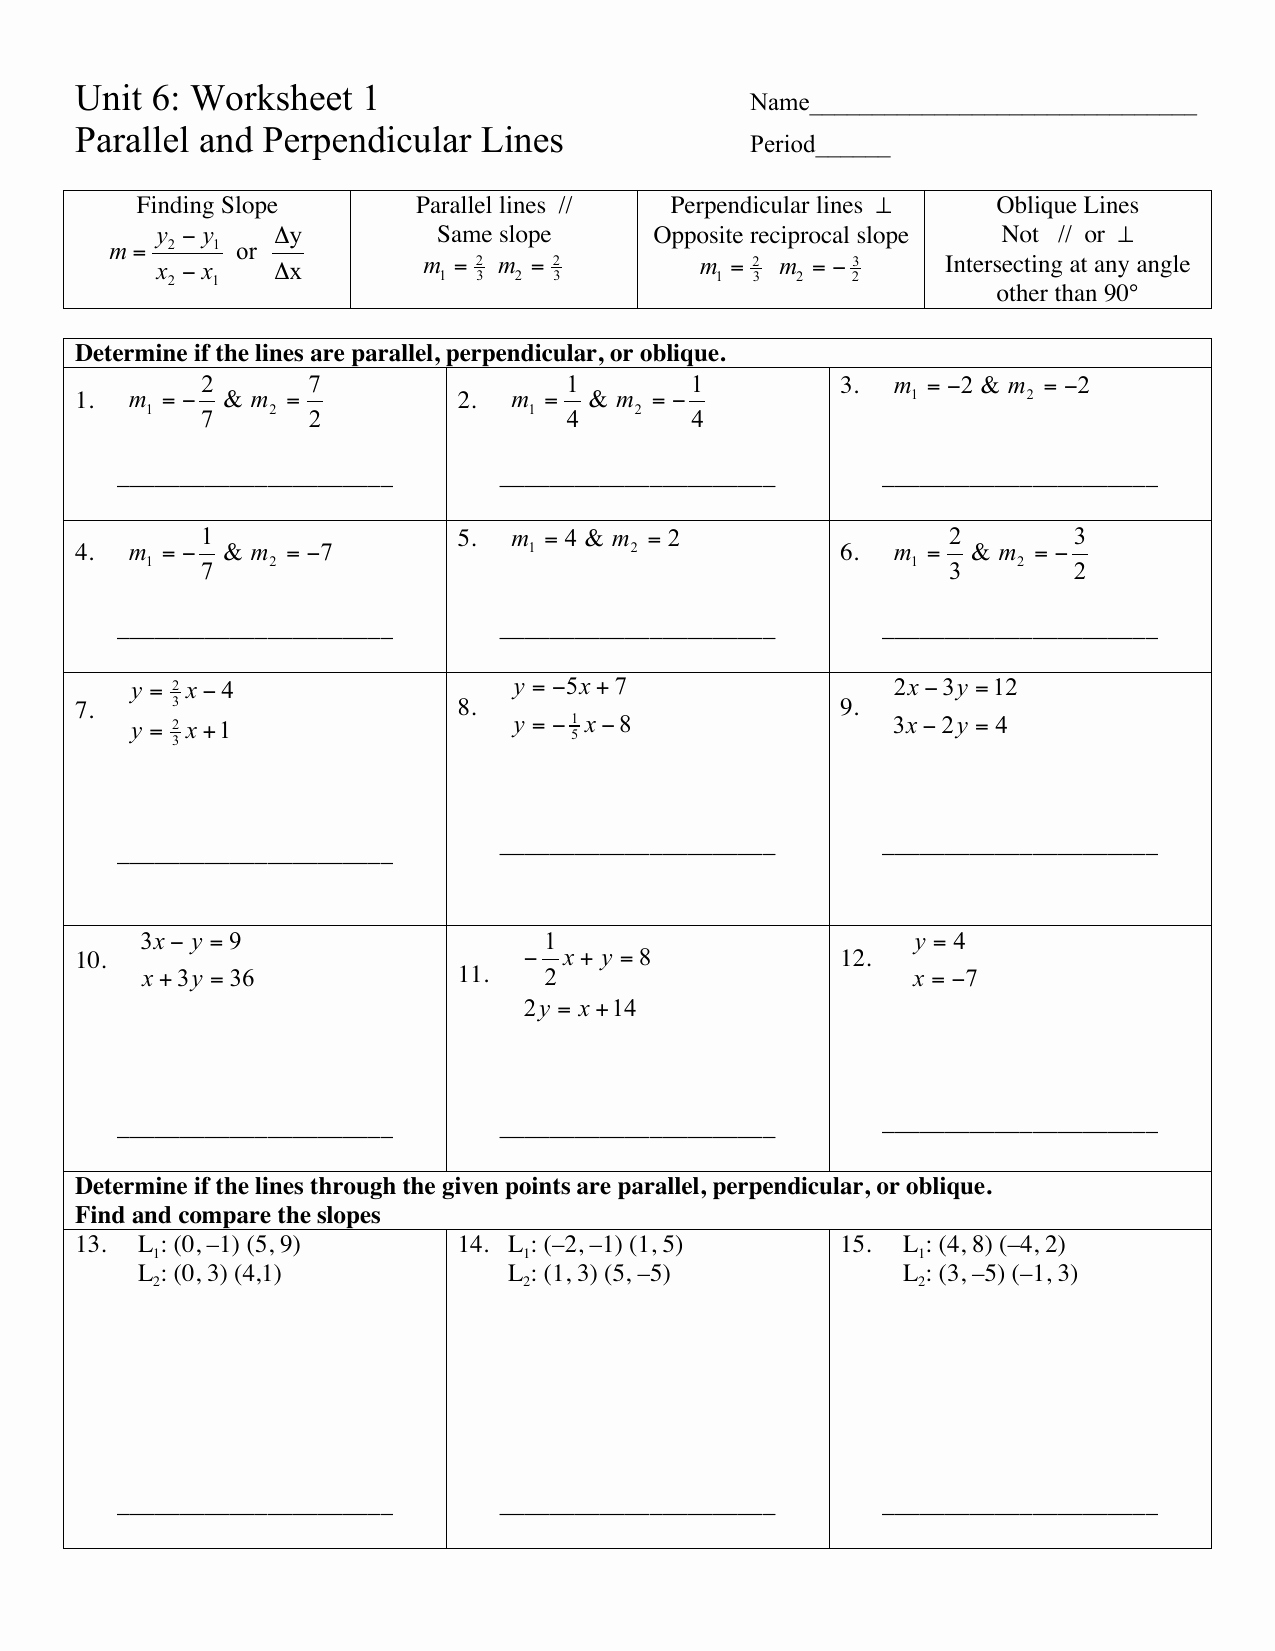 Writing Equations Of Lines Worksheet Best Of Writing Equations for Parallel and Perpendicular Lines